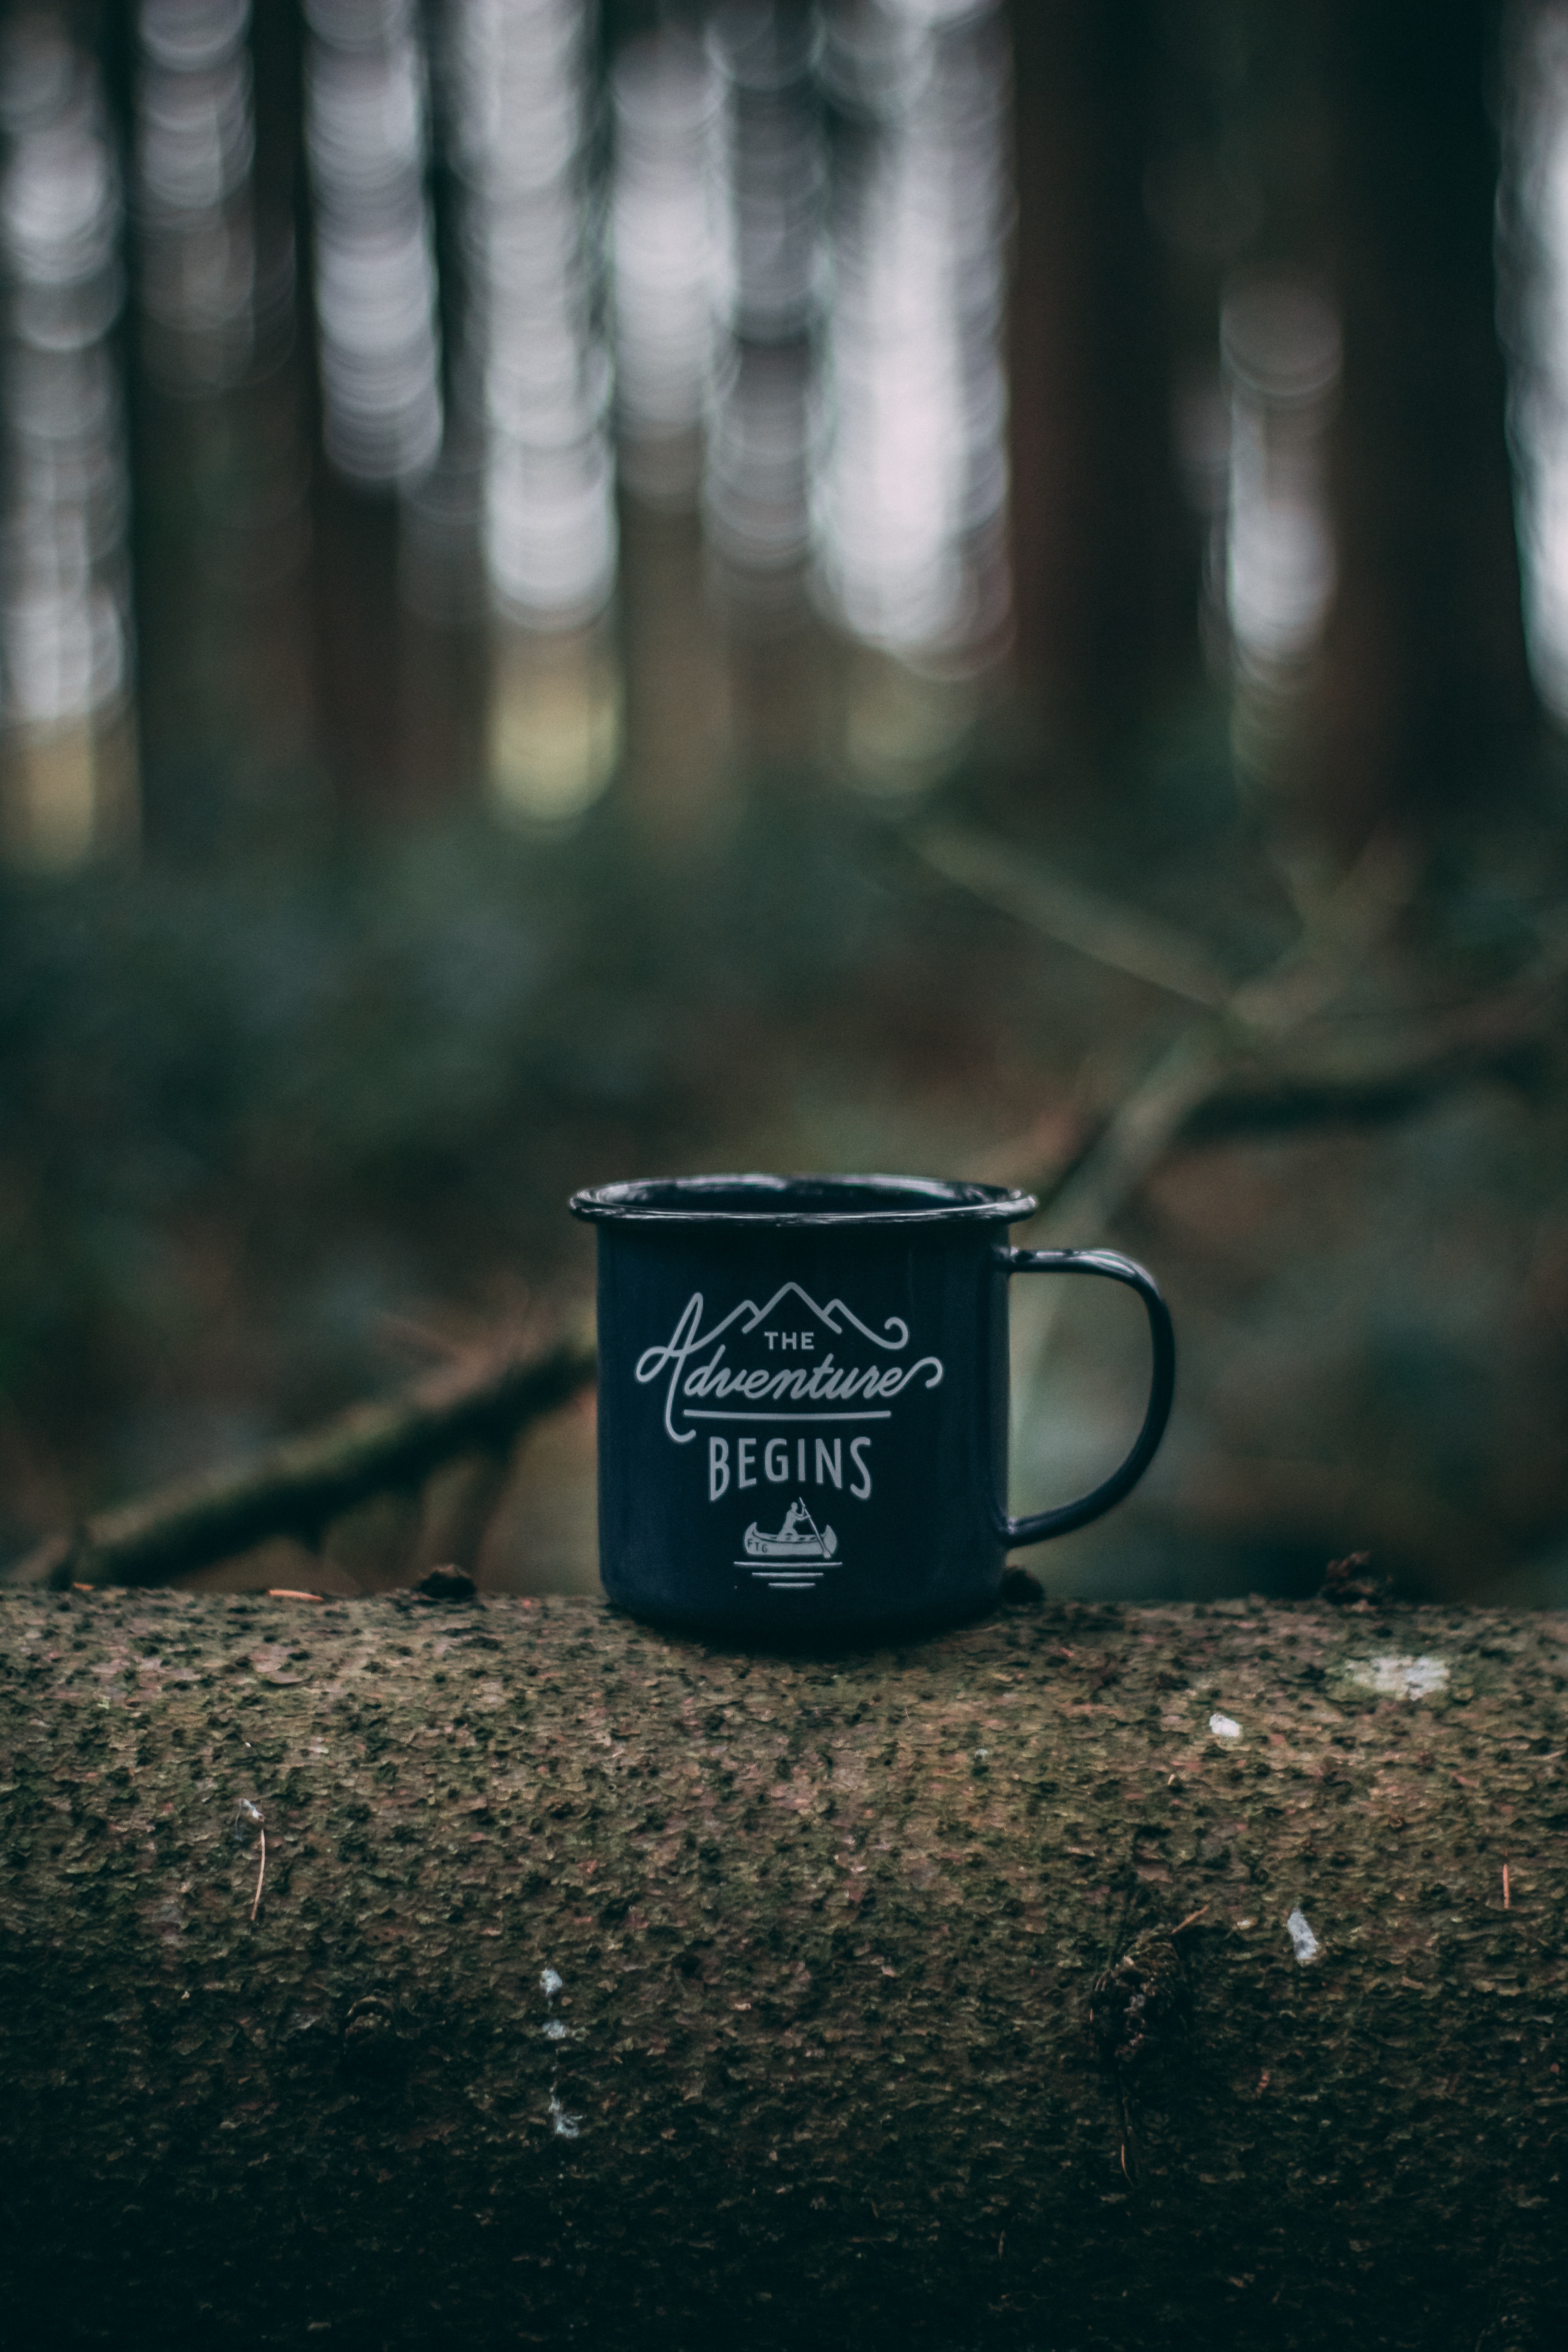 words, camping, mug, journey, cup, campsite